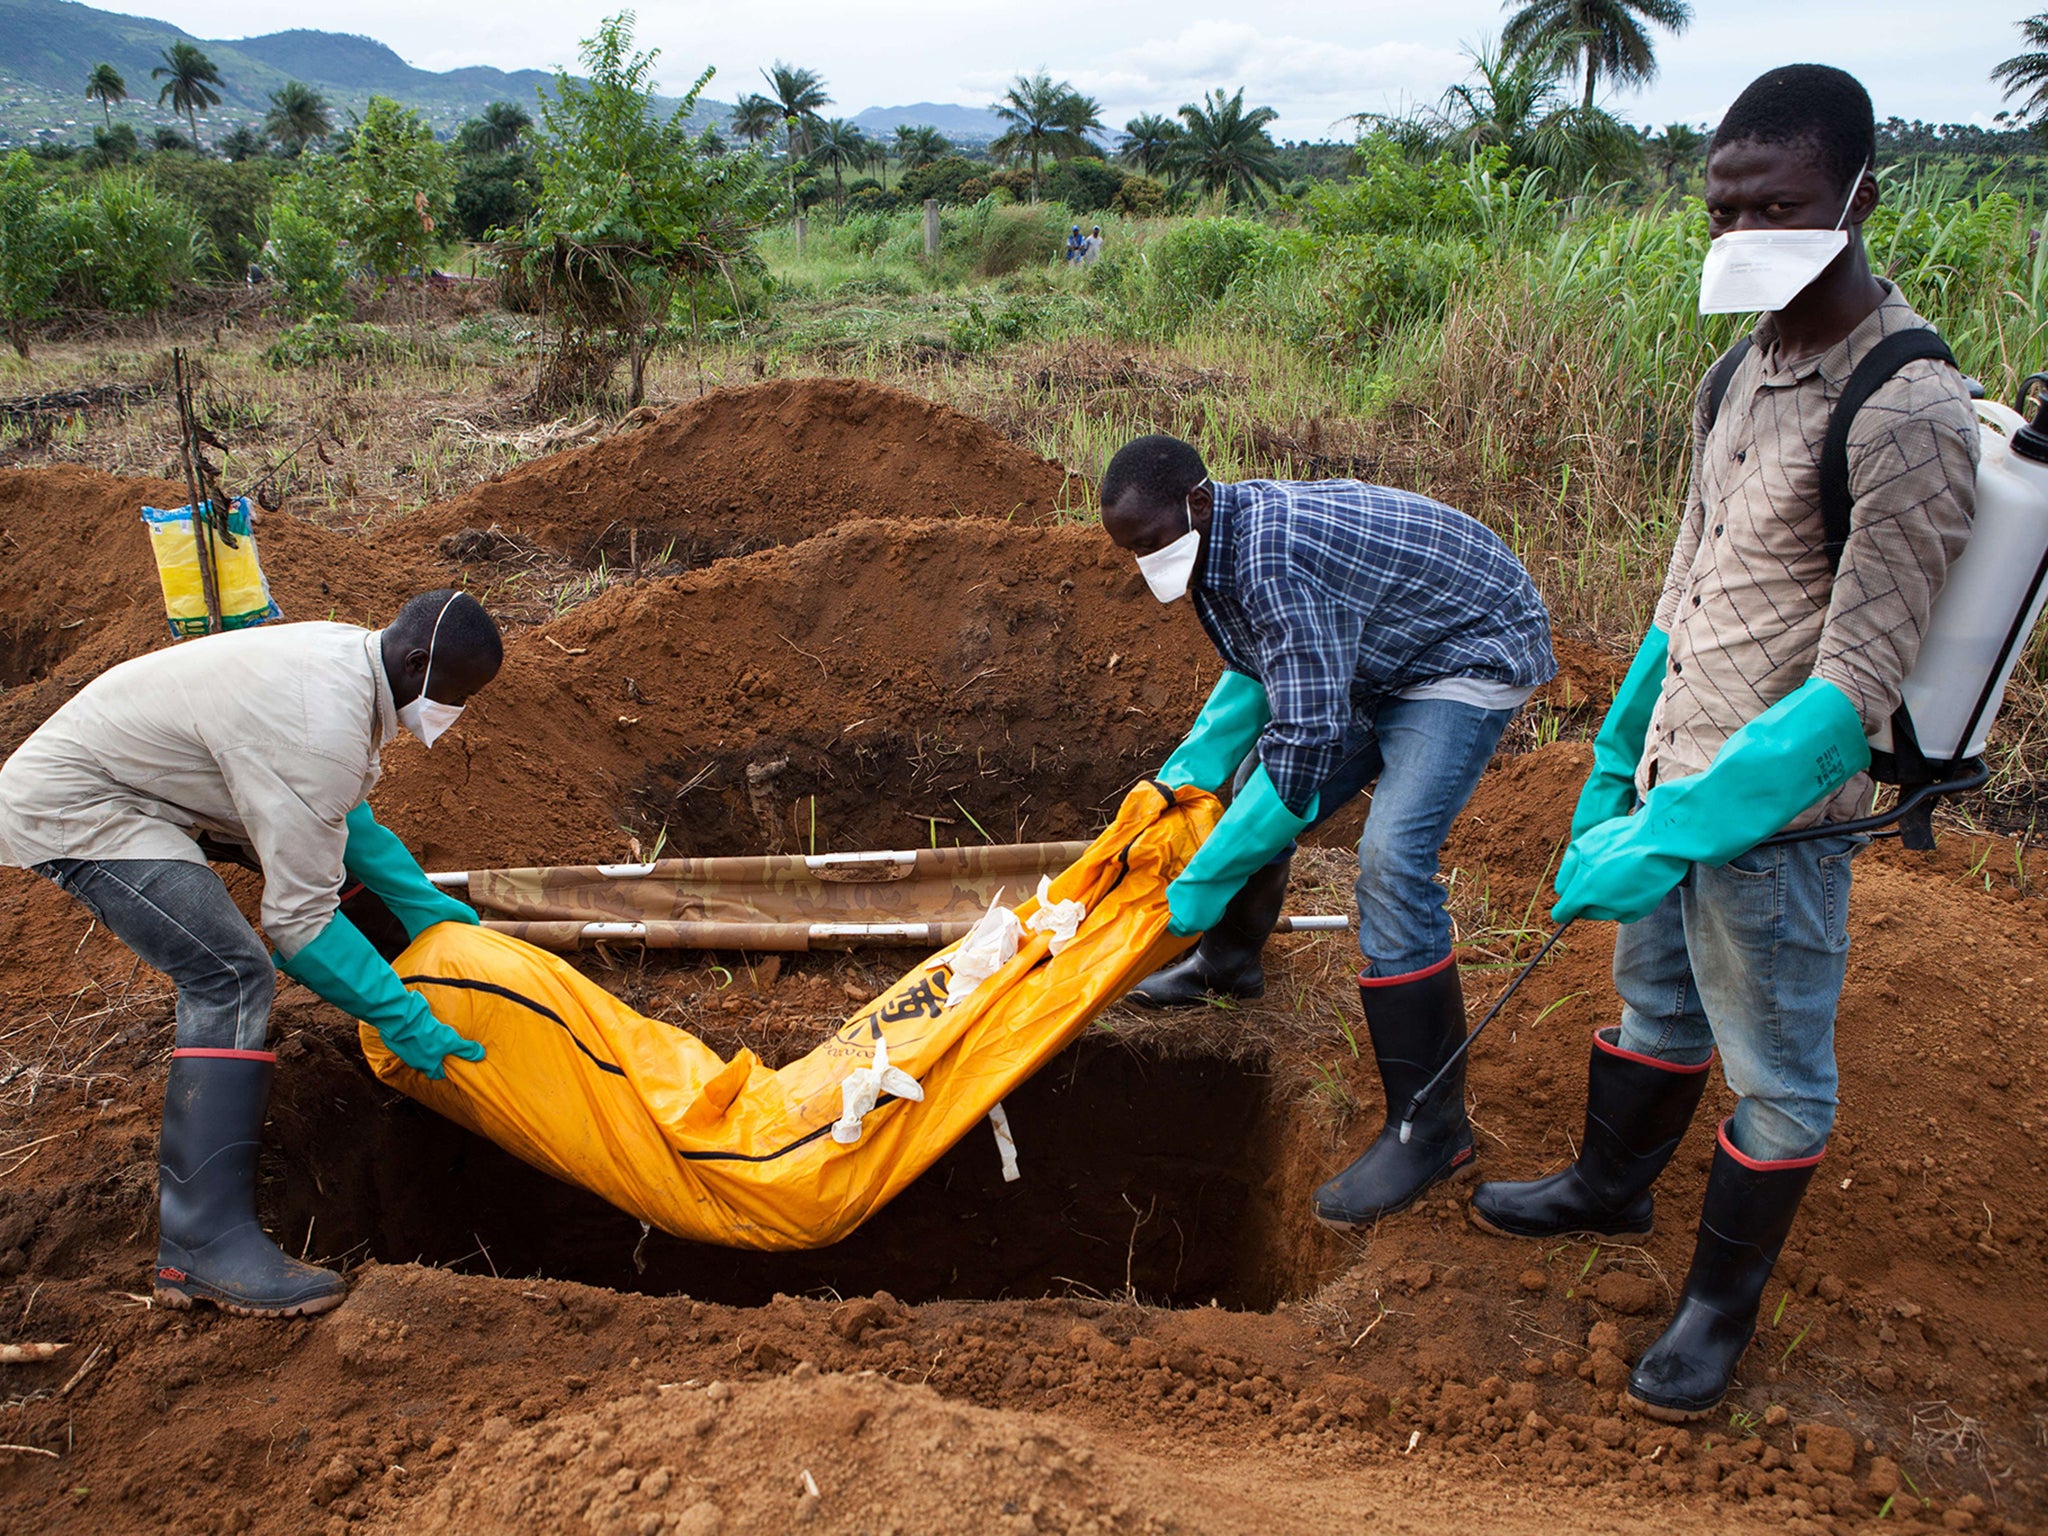 Volunteers in protective suit bury the body of a person who died from Ebola in Waterloo, some 30 kilometers southeast of Freetown